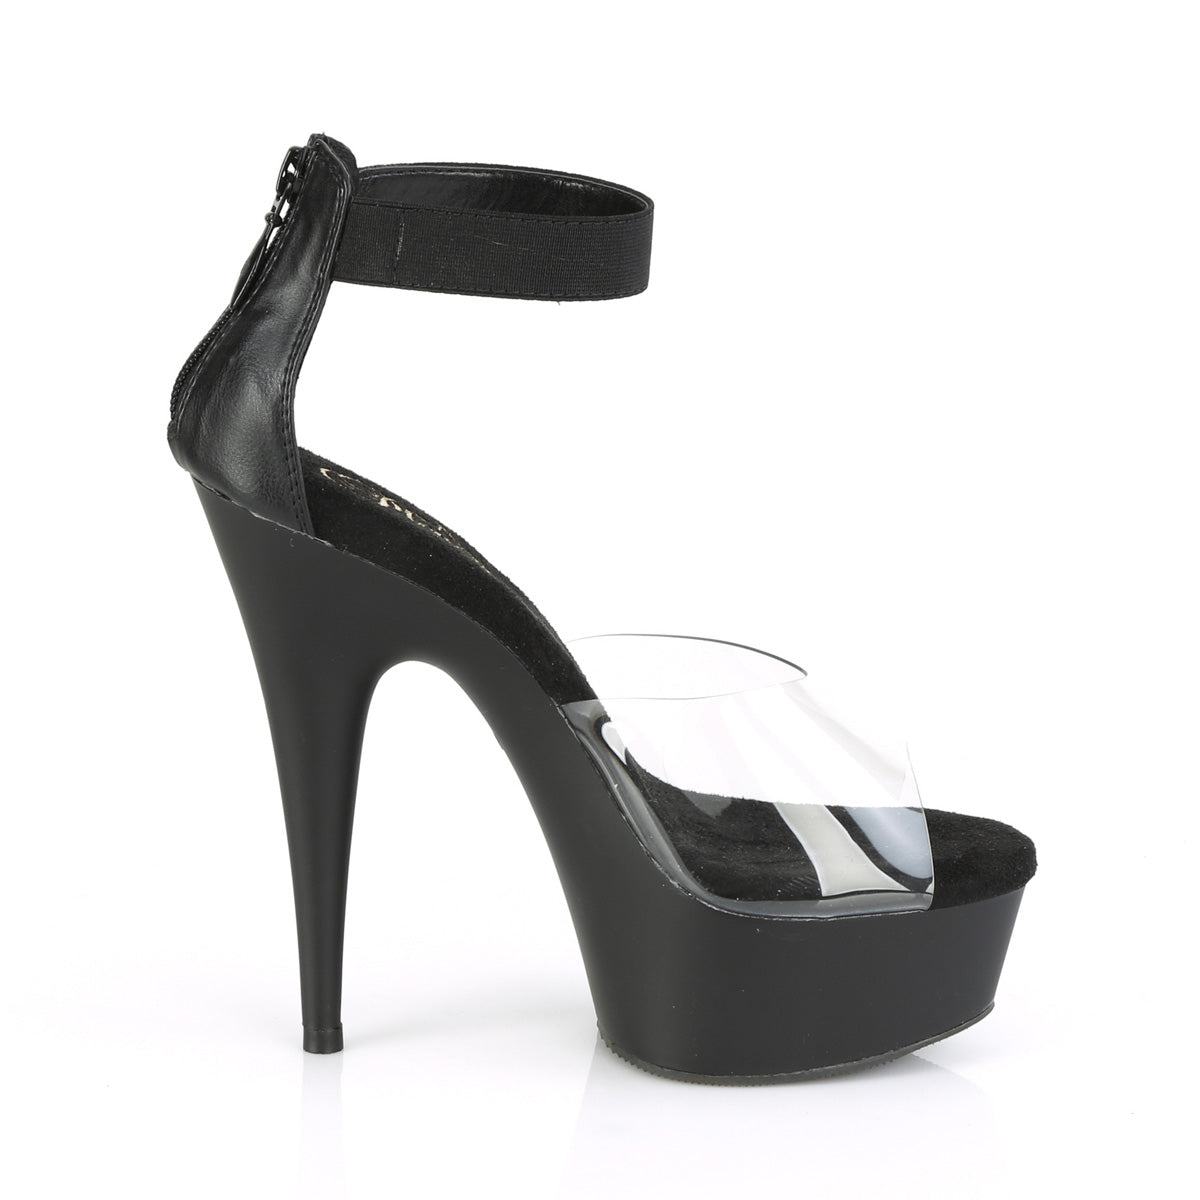 DELIGHT-624 Pleaser Pole Dancing Shoes 6 Inch Inch Heel Pleasers - Sexy Shoes Fetish Heels